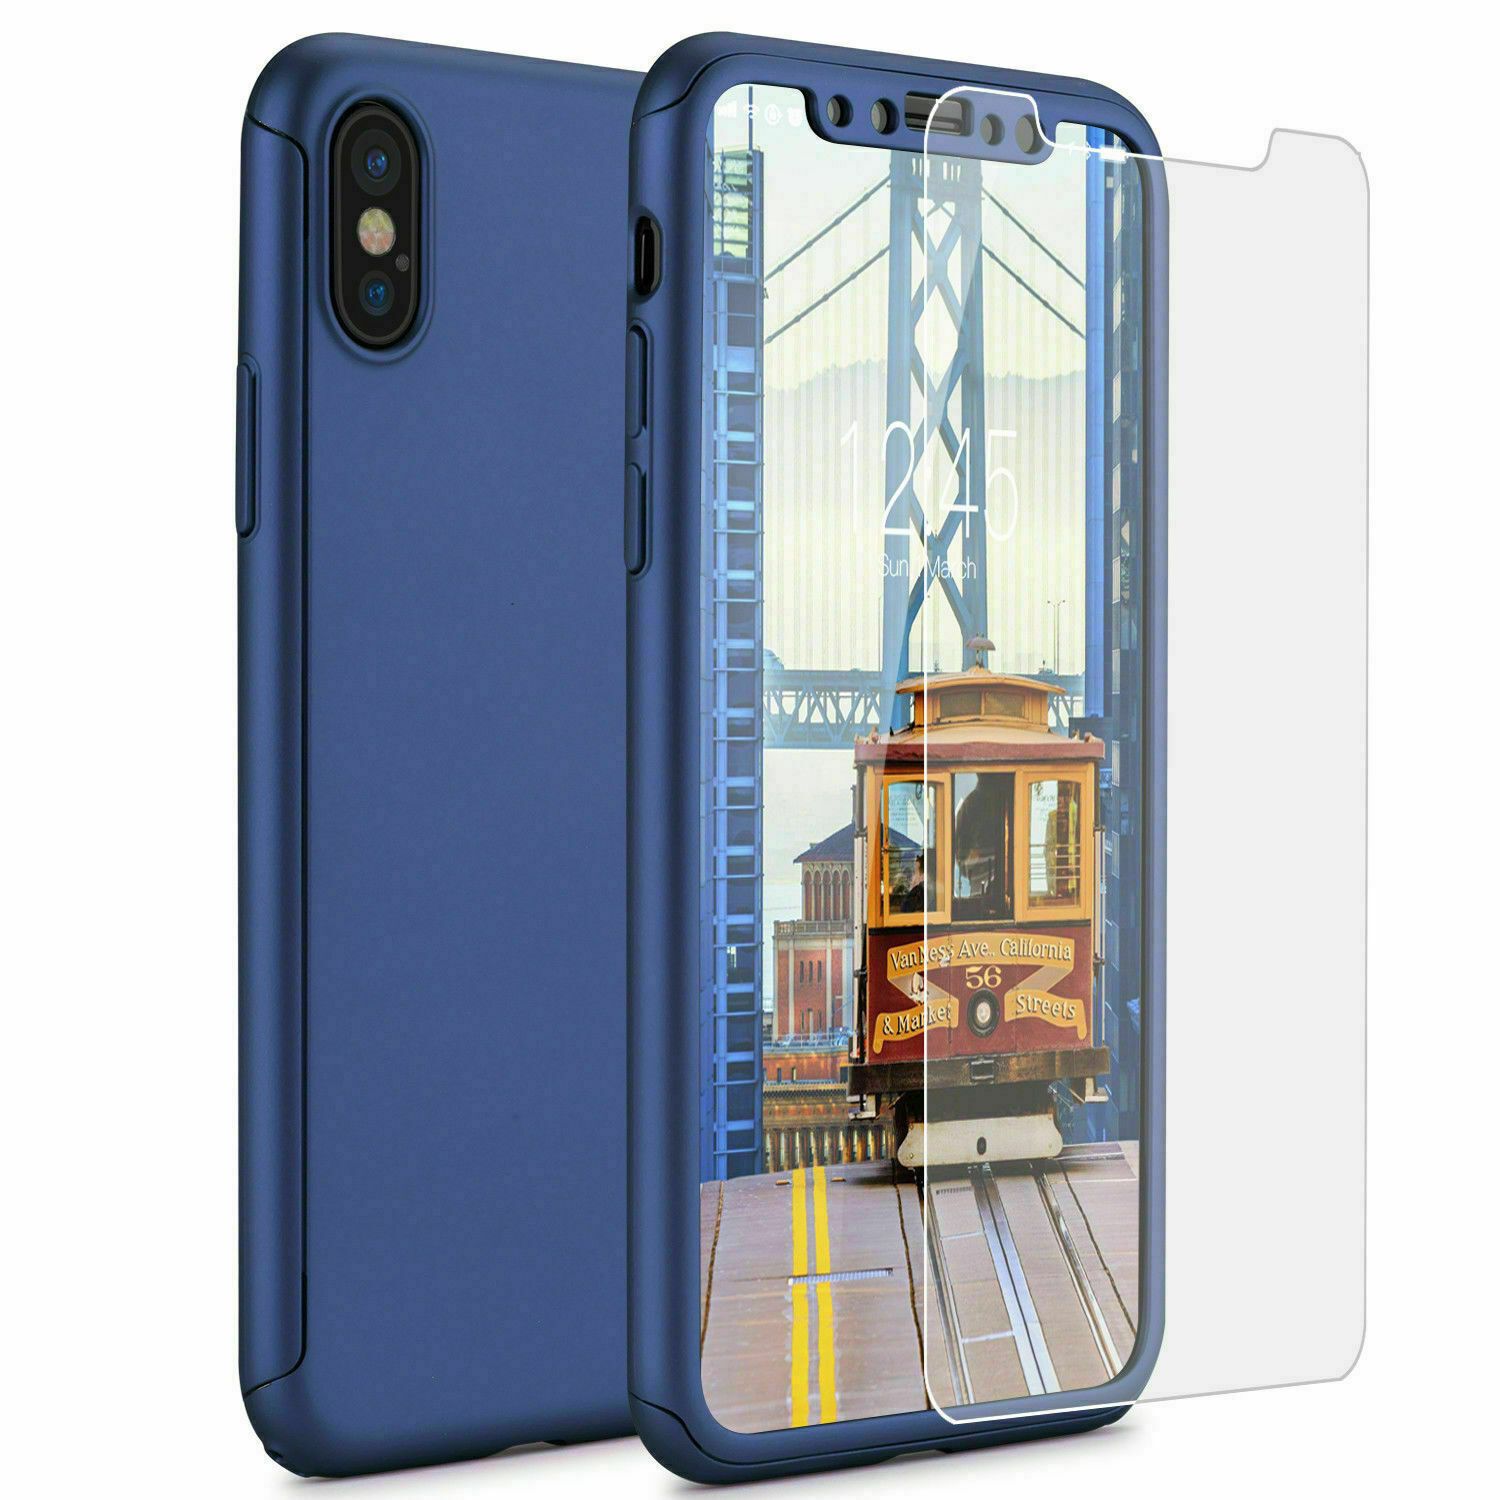 360° Full-Wrap Thin Fit For iPhone X / Xs iPhone Cases AtlasBling Dark Blue 